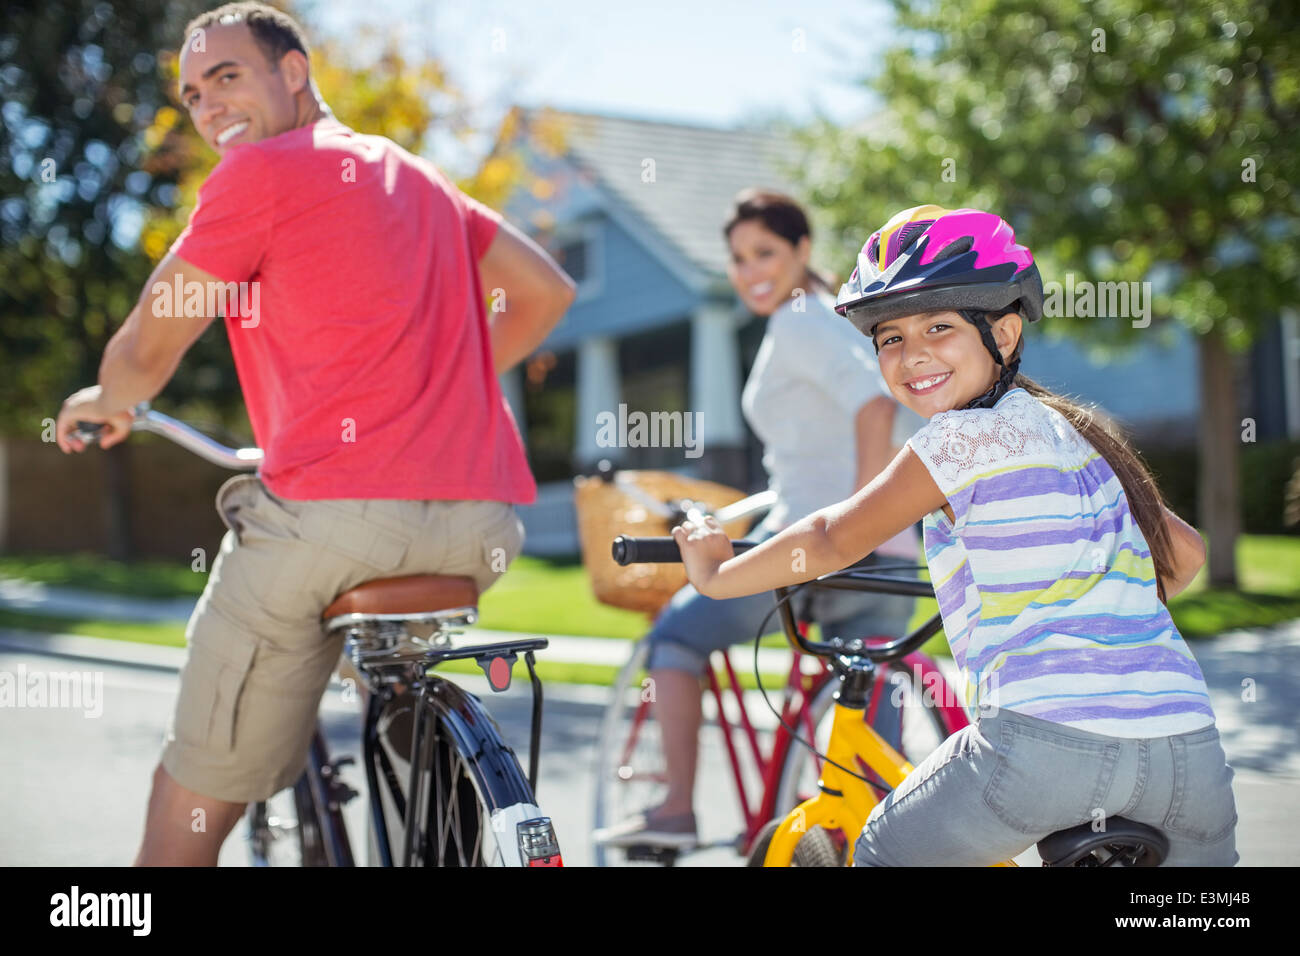 Portrait of family riding bikes on street Banque D'Images